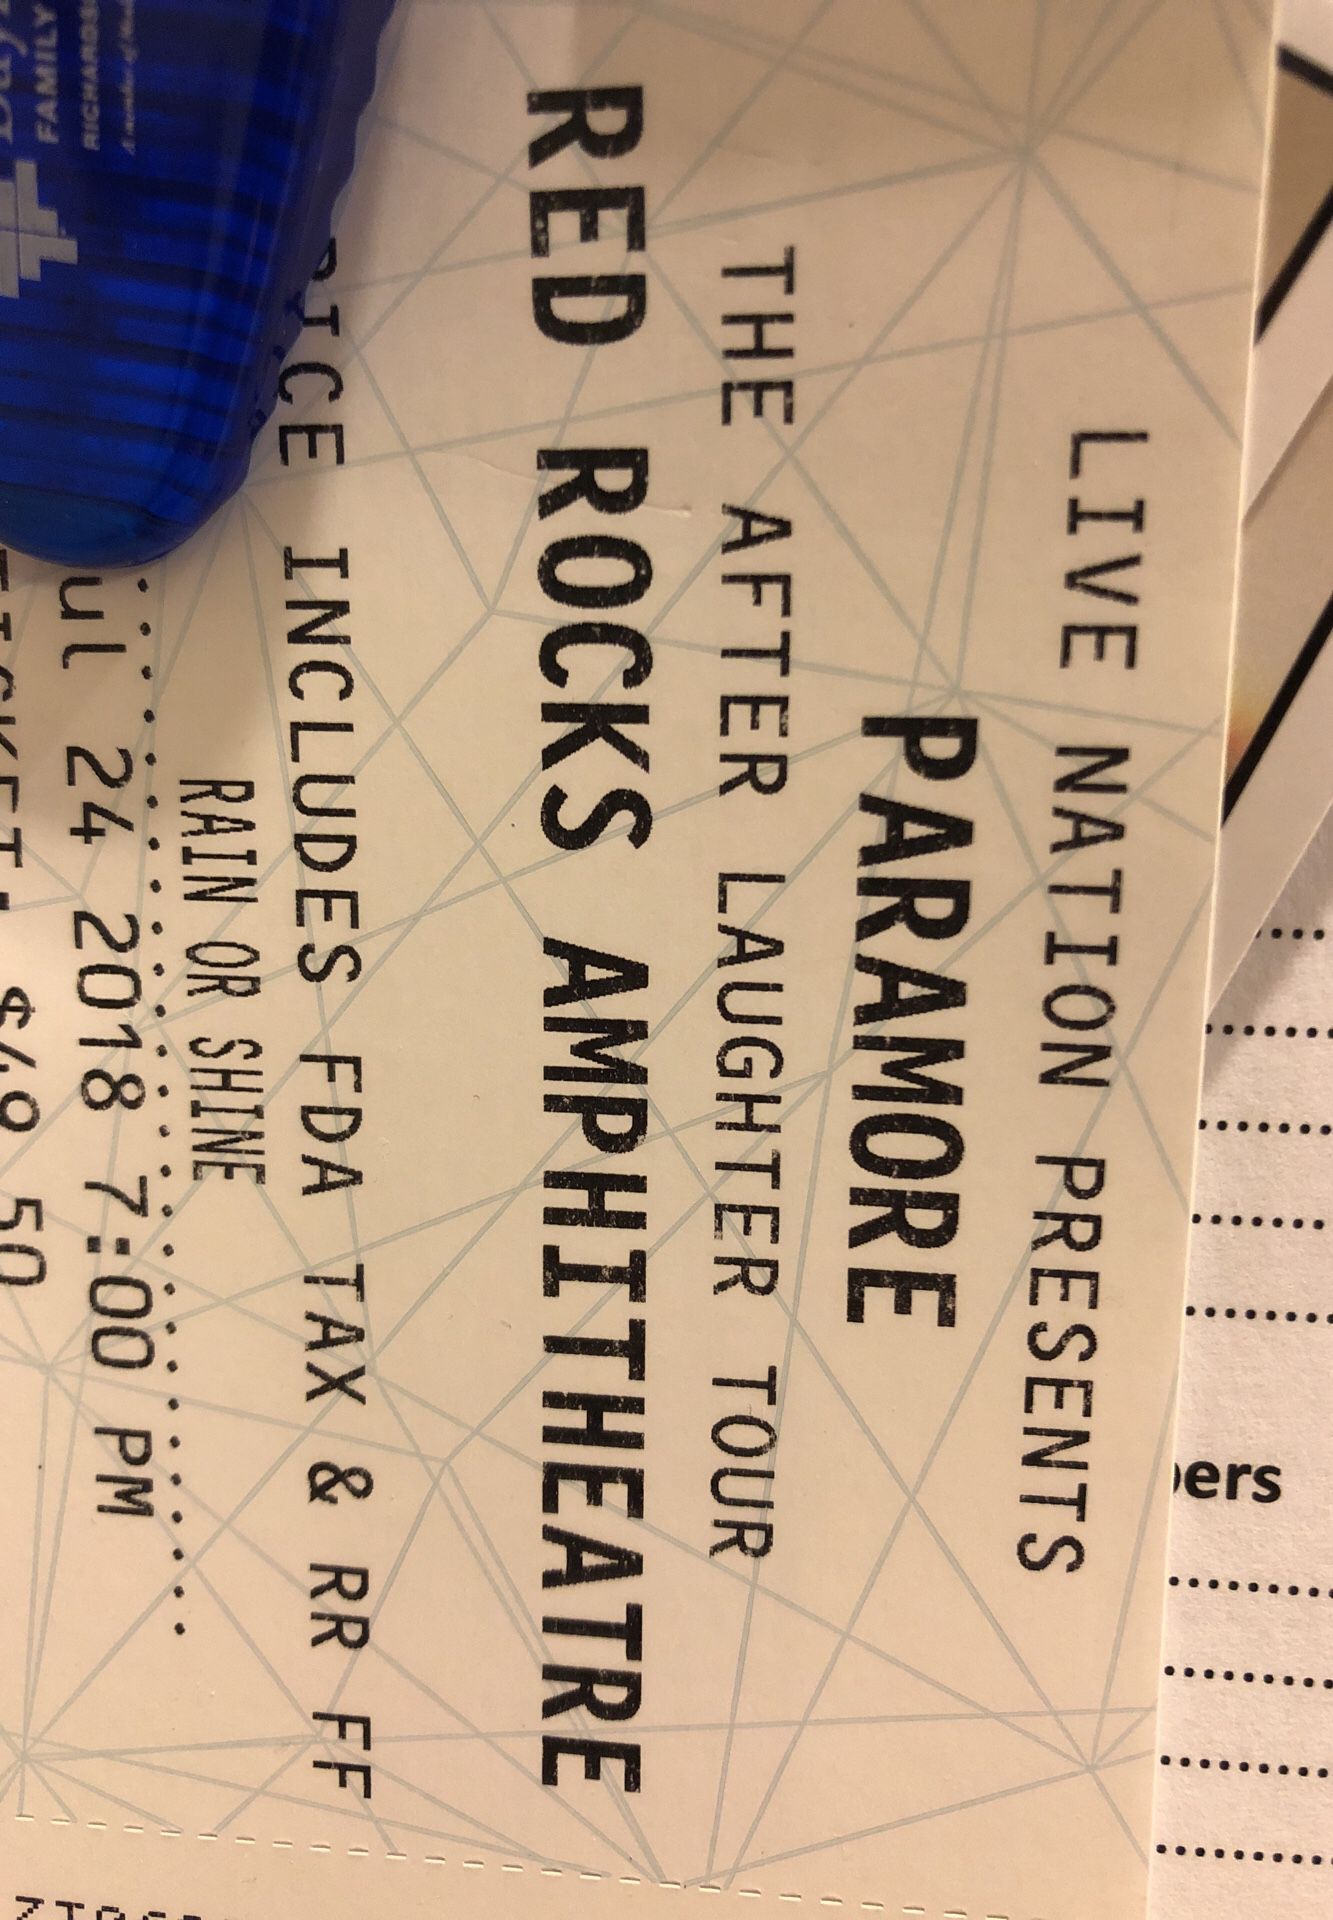 2 General Admissions Tickets to Foster the People / Paramore at Red Rocks